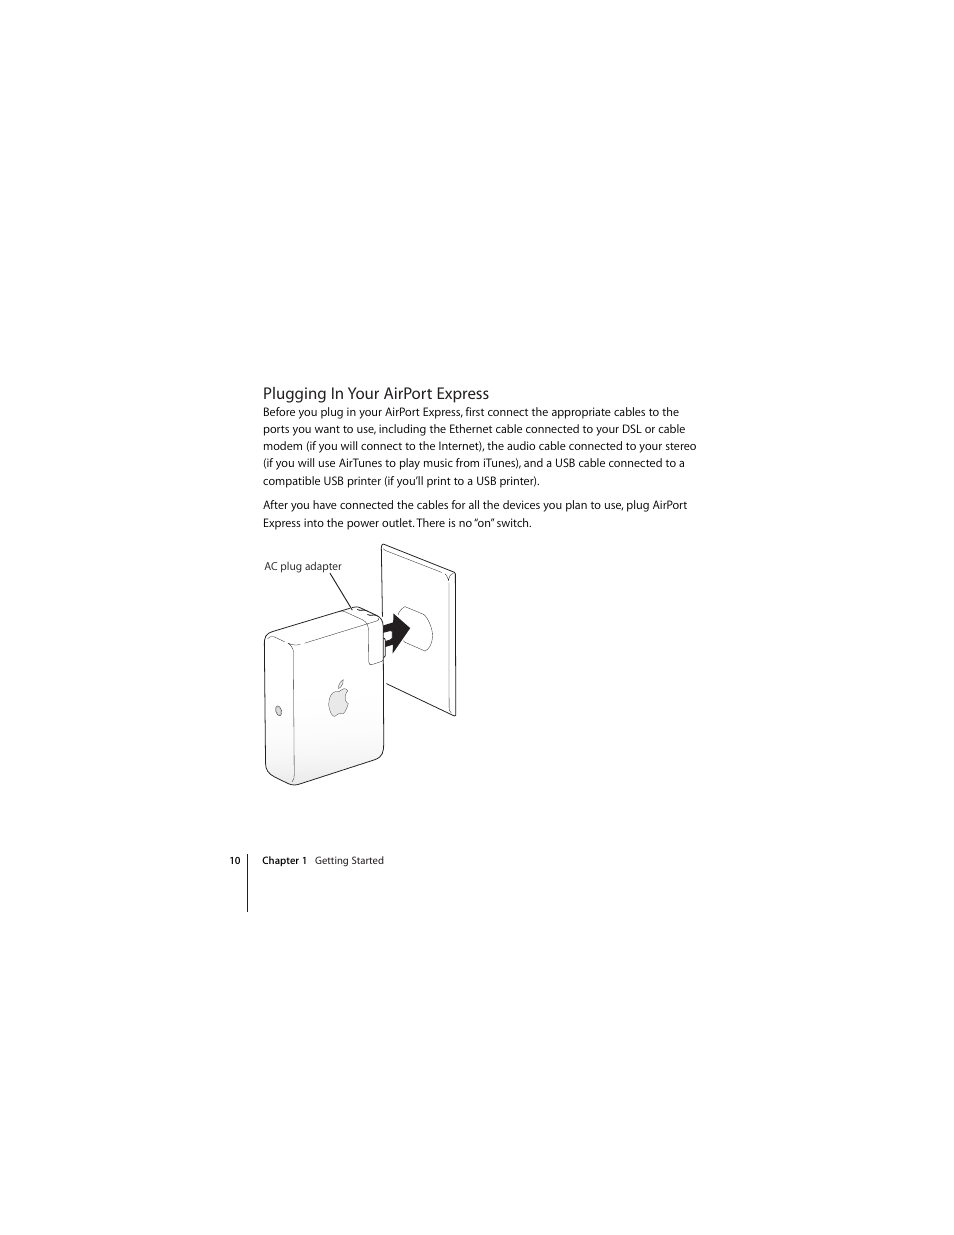 Plugging in your airport express | Apple AirPort Express 802.11n (1st Generation) User Manual | Page 10 / | Original mode